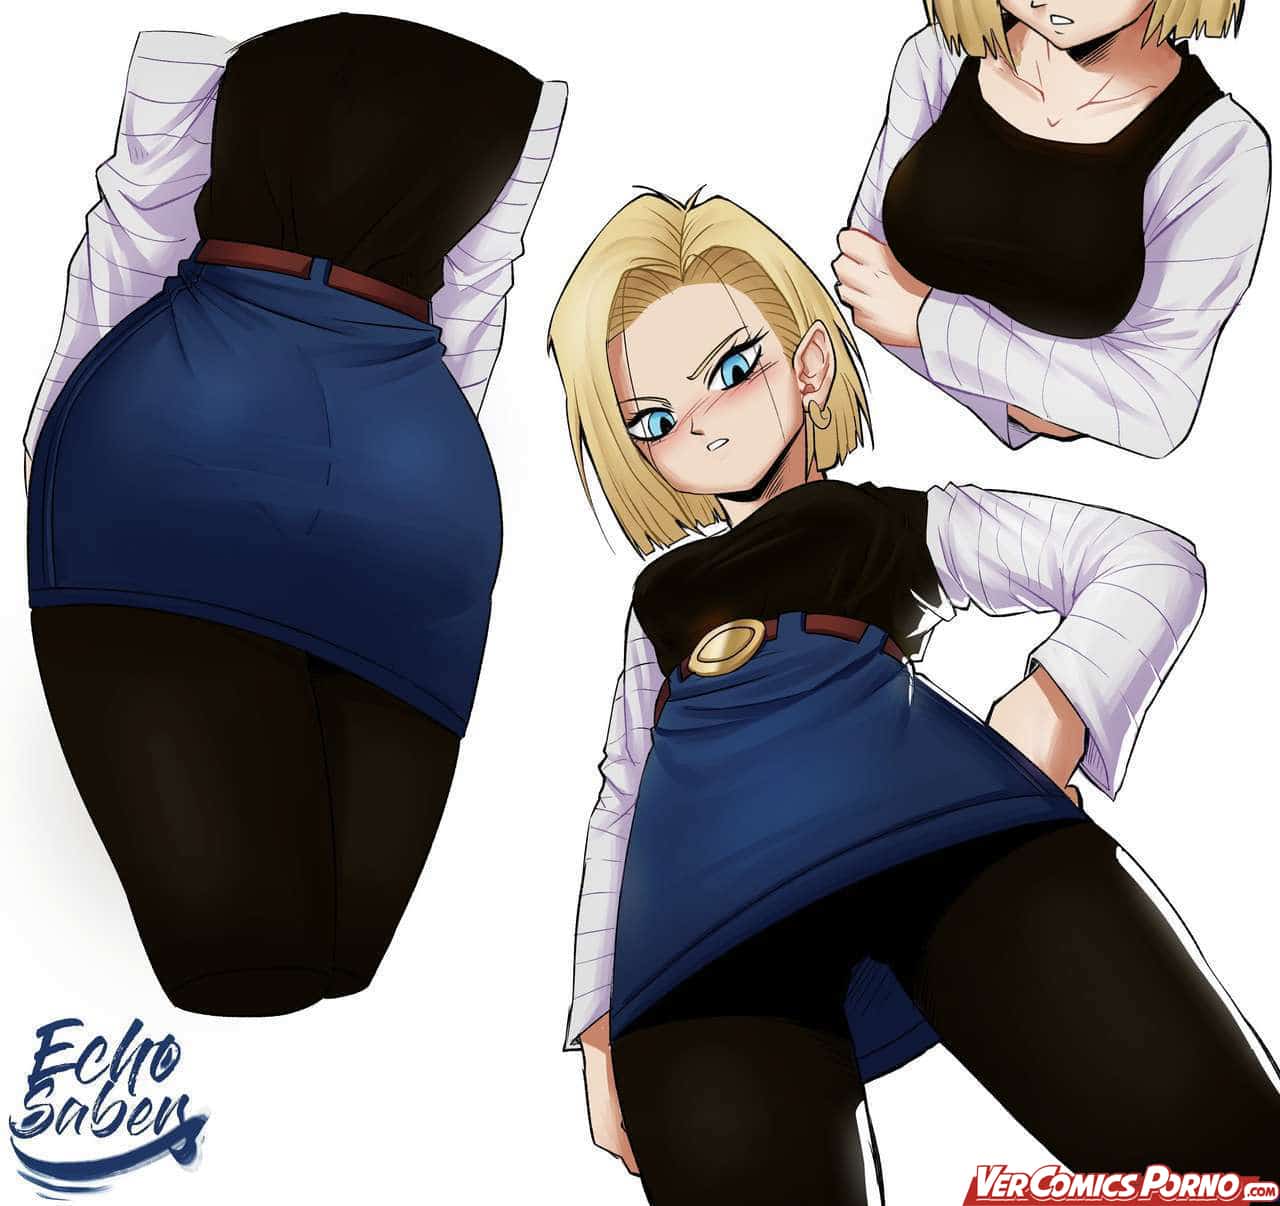 [Echo Saber] Android 18 Mini – Body Swapping With A Weakling (Traduccion Exclusiva) - 0